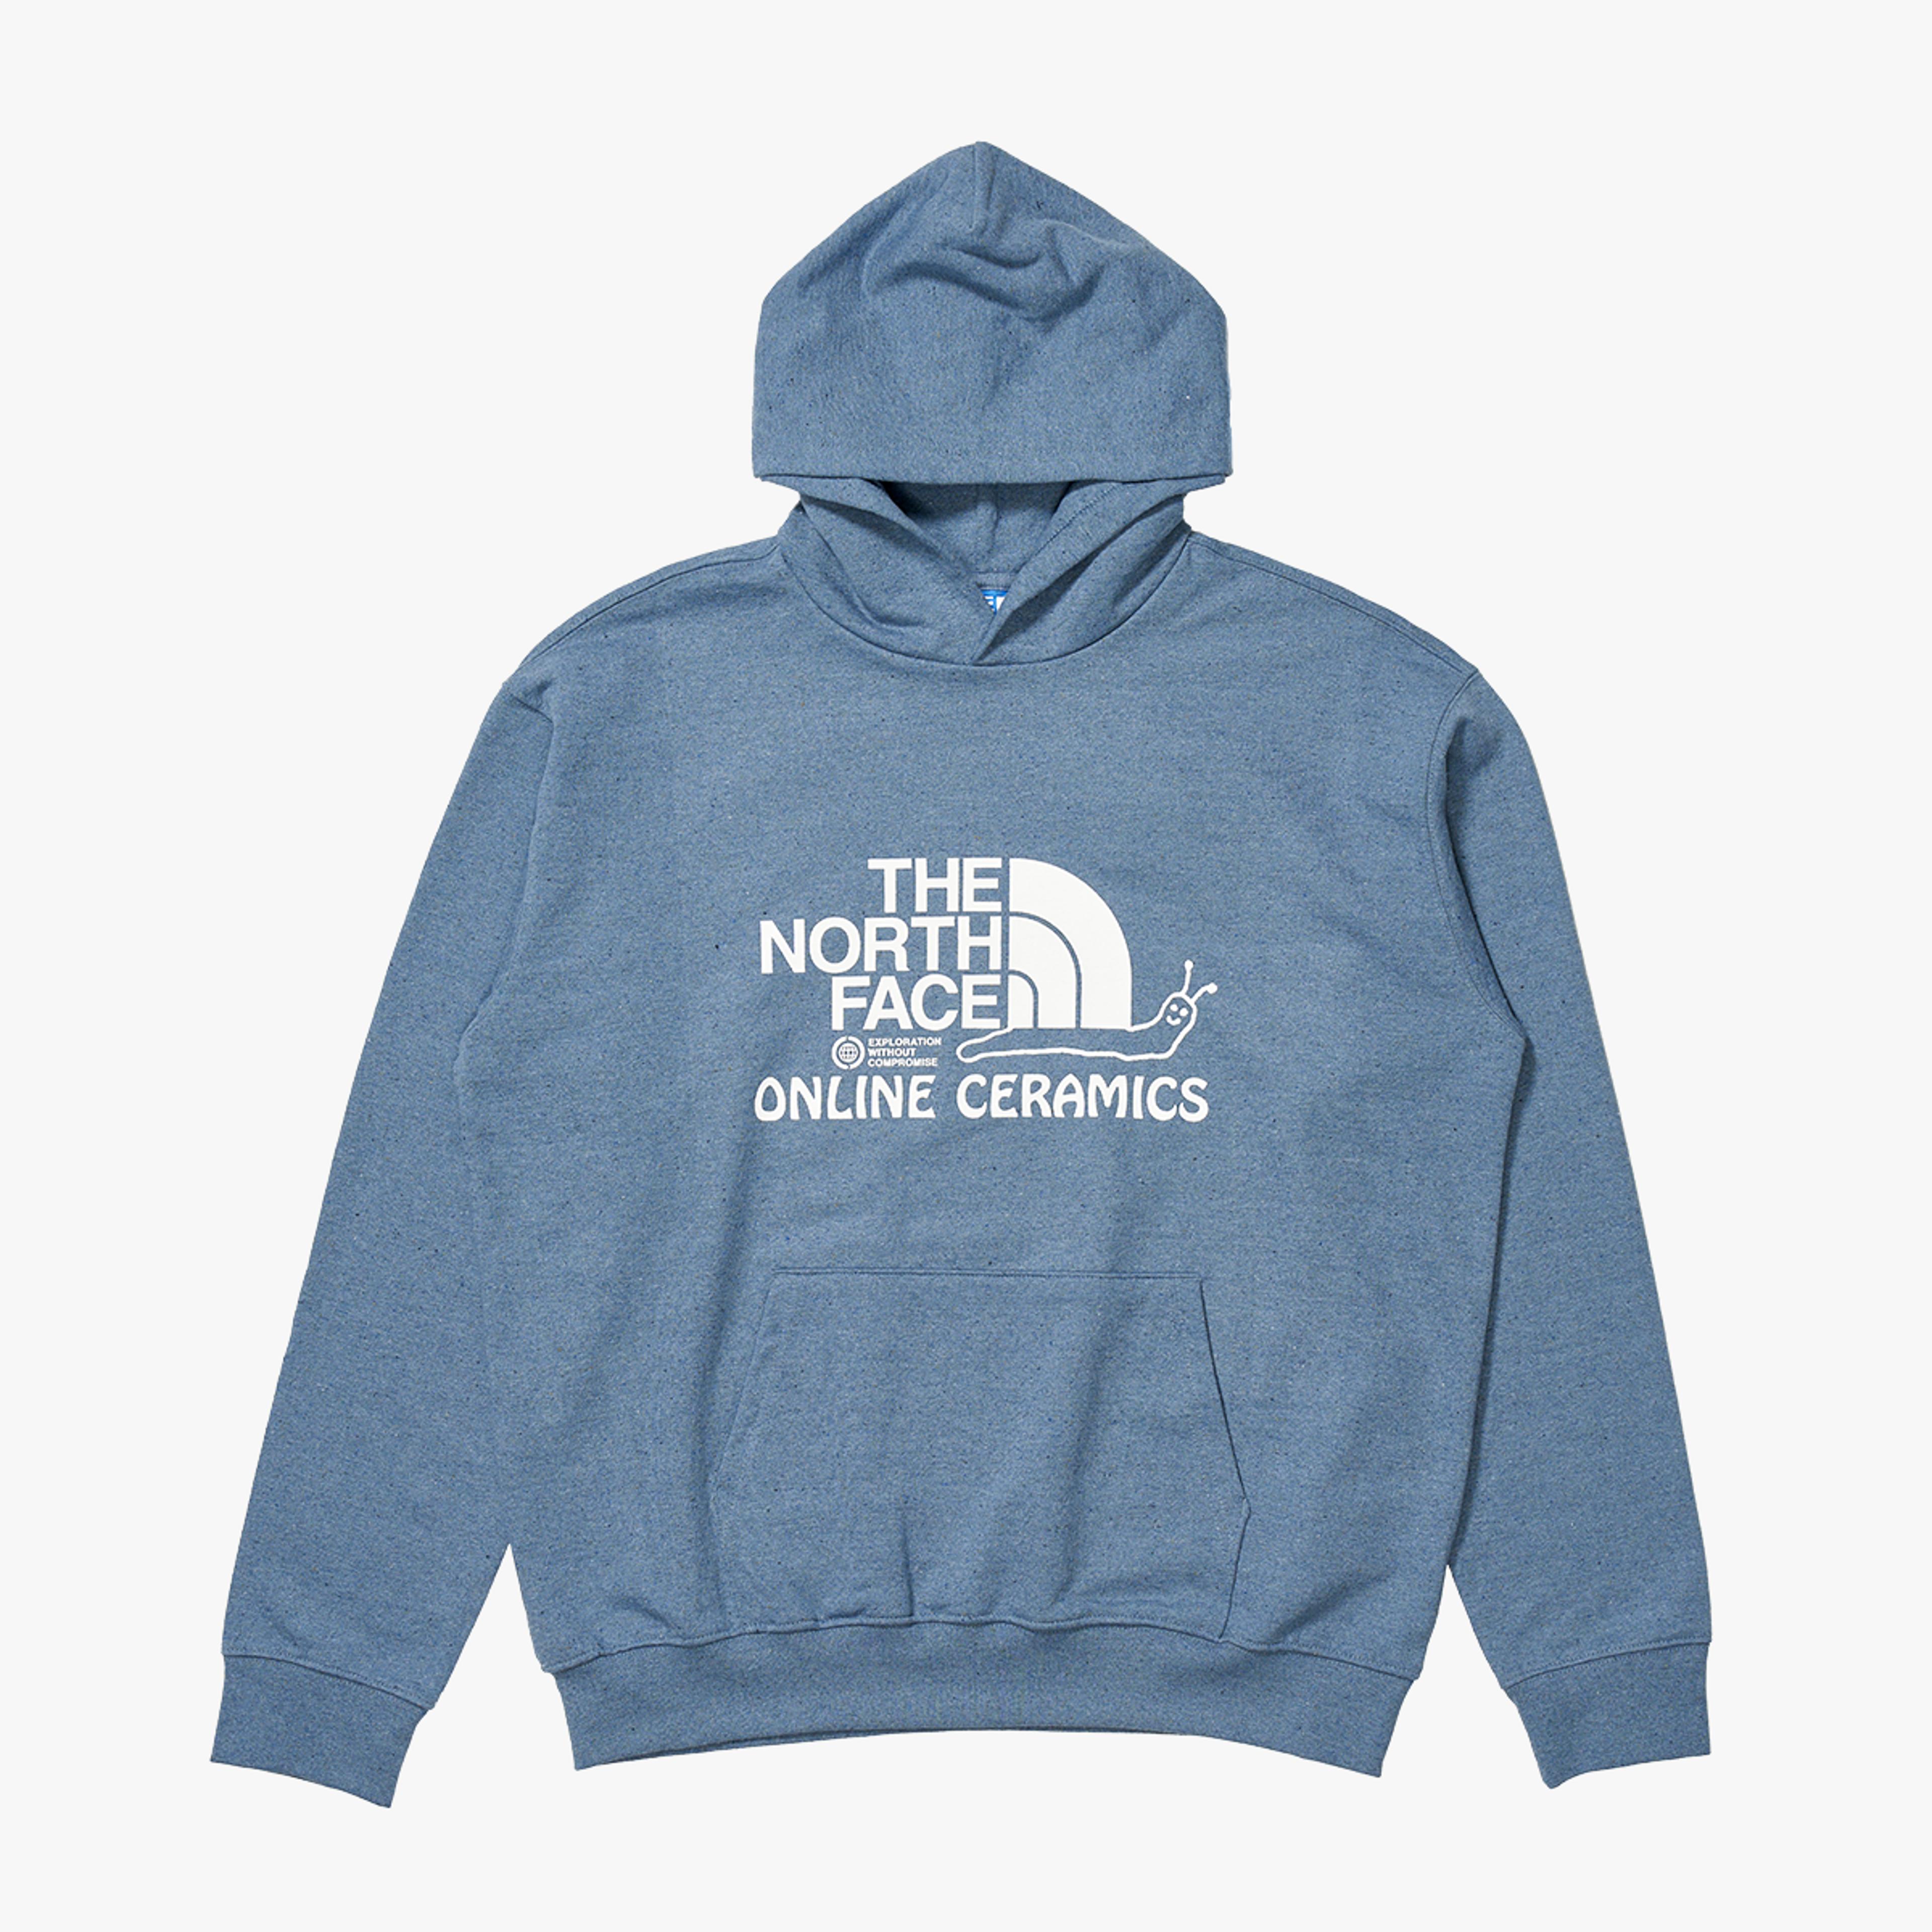 The North Face x Online Ceramics Graphic Hoody (Blue Regrind)